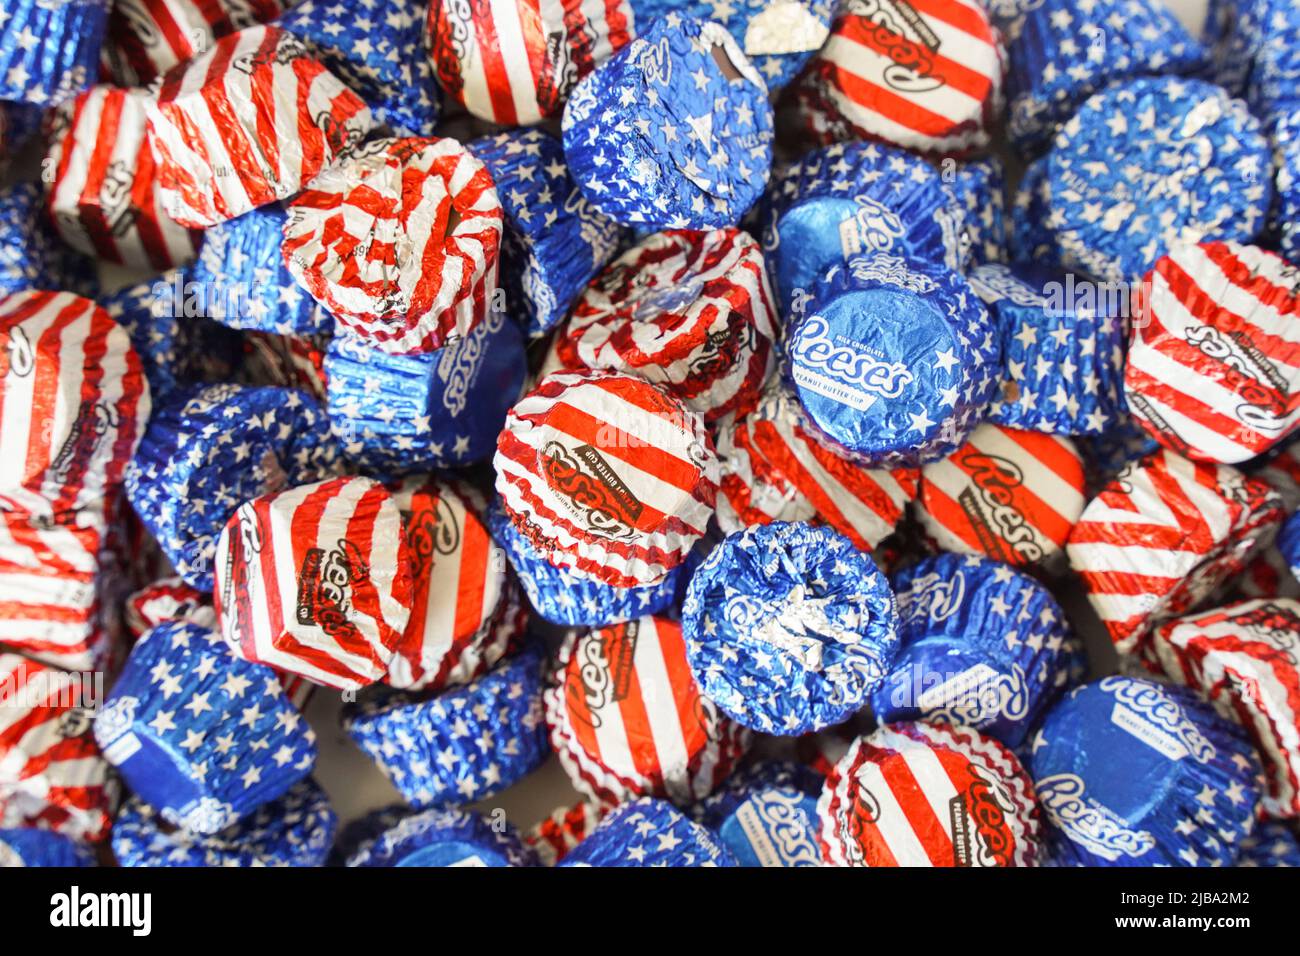 Reese's miniature cups, special edition American flag, Reeses peanut butter cups. Stock Photo